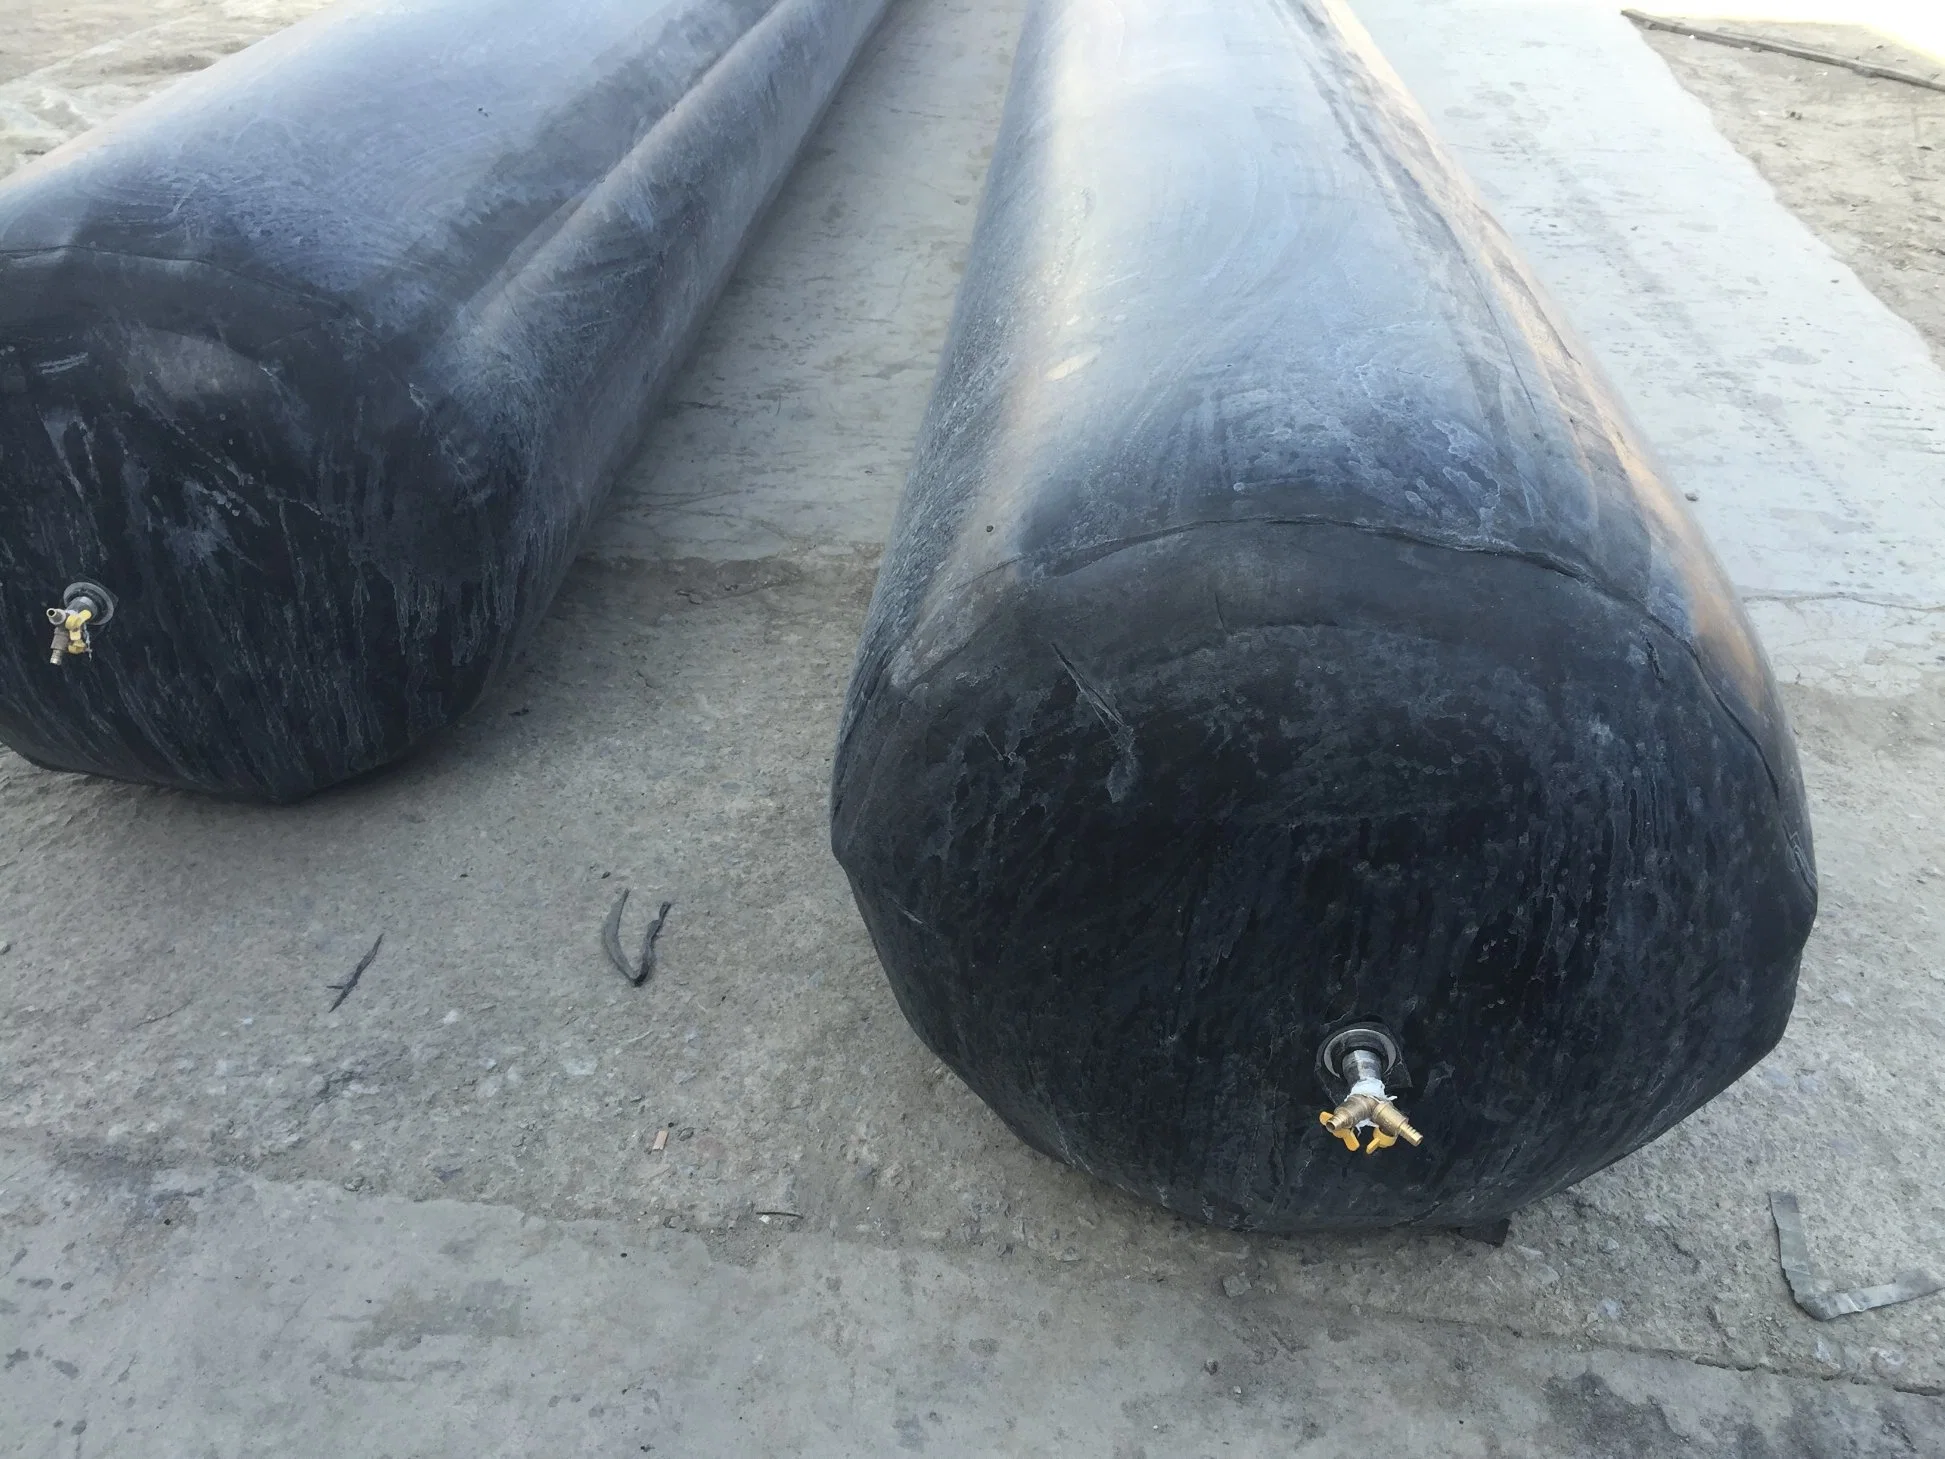 Rubber Inflatable Culvert Balloon Used for Bridge Construction